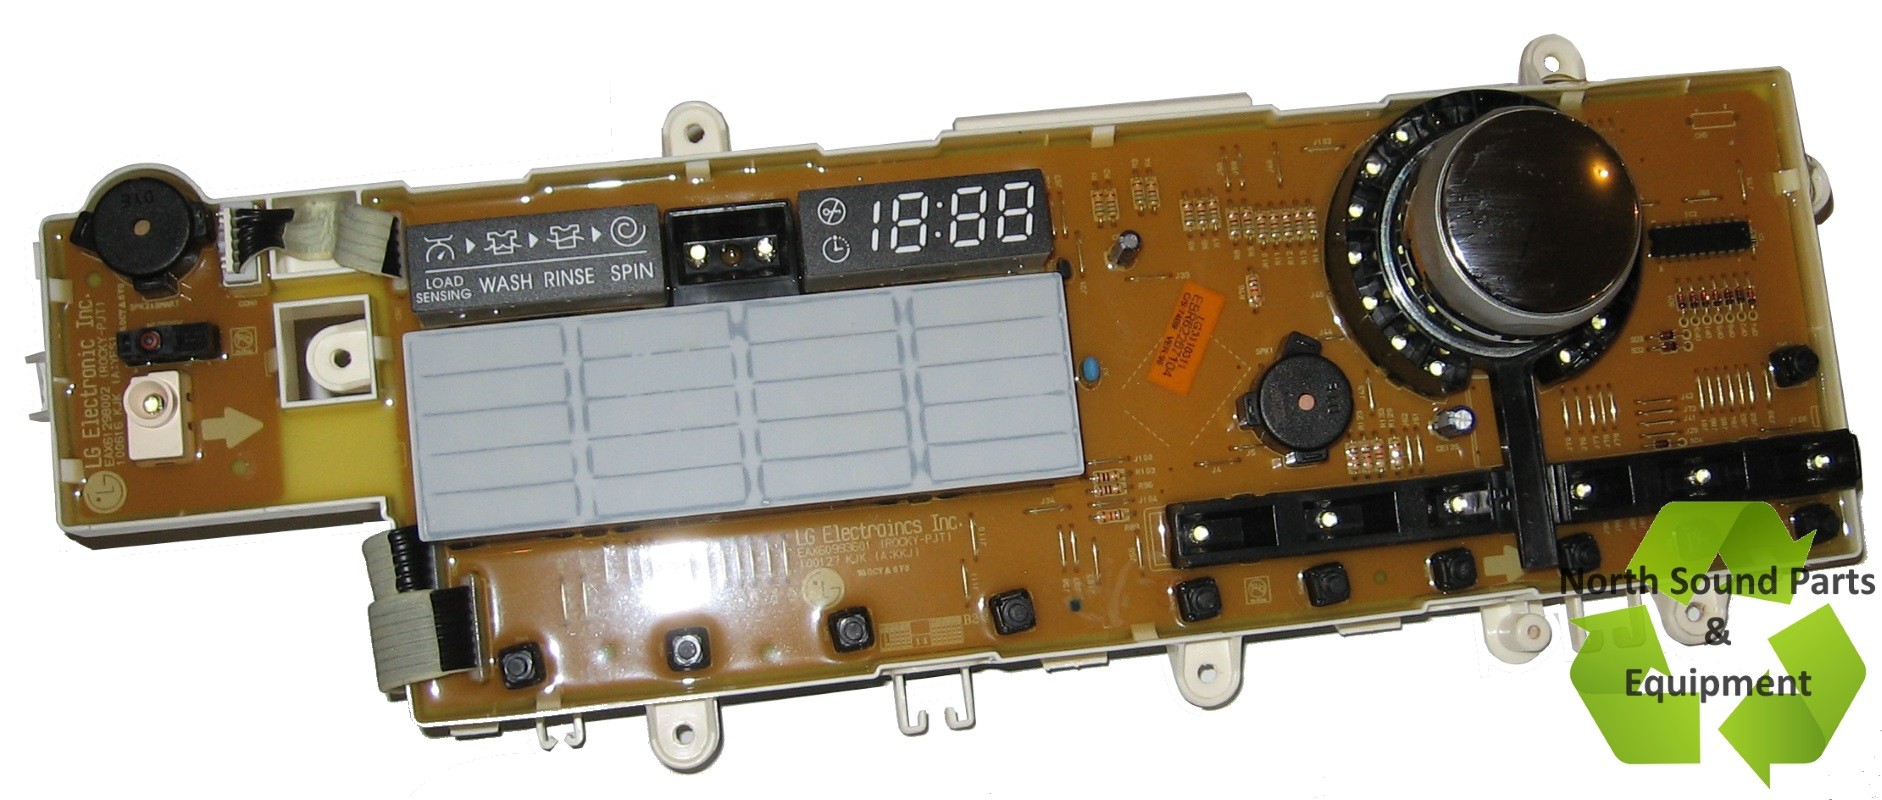 LG Washer Control and Display Board Assembly 1